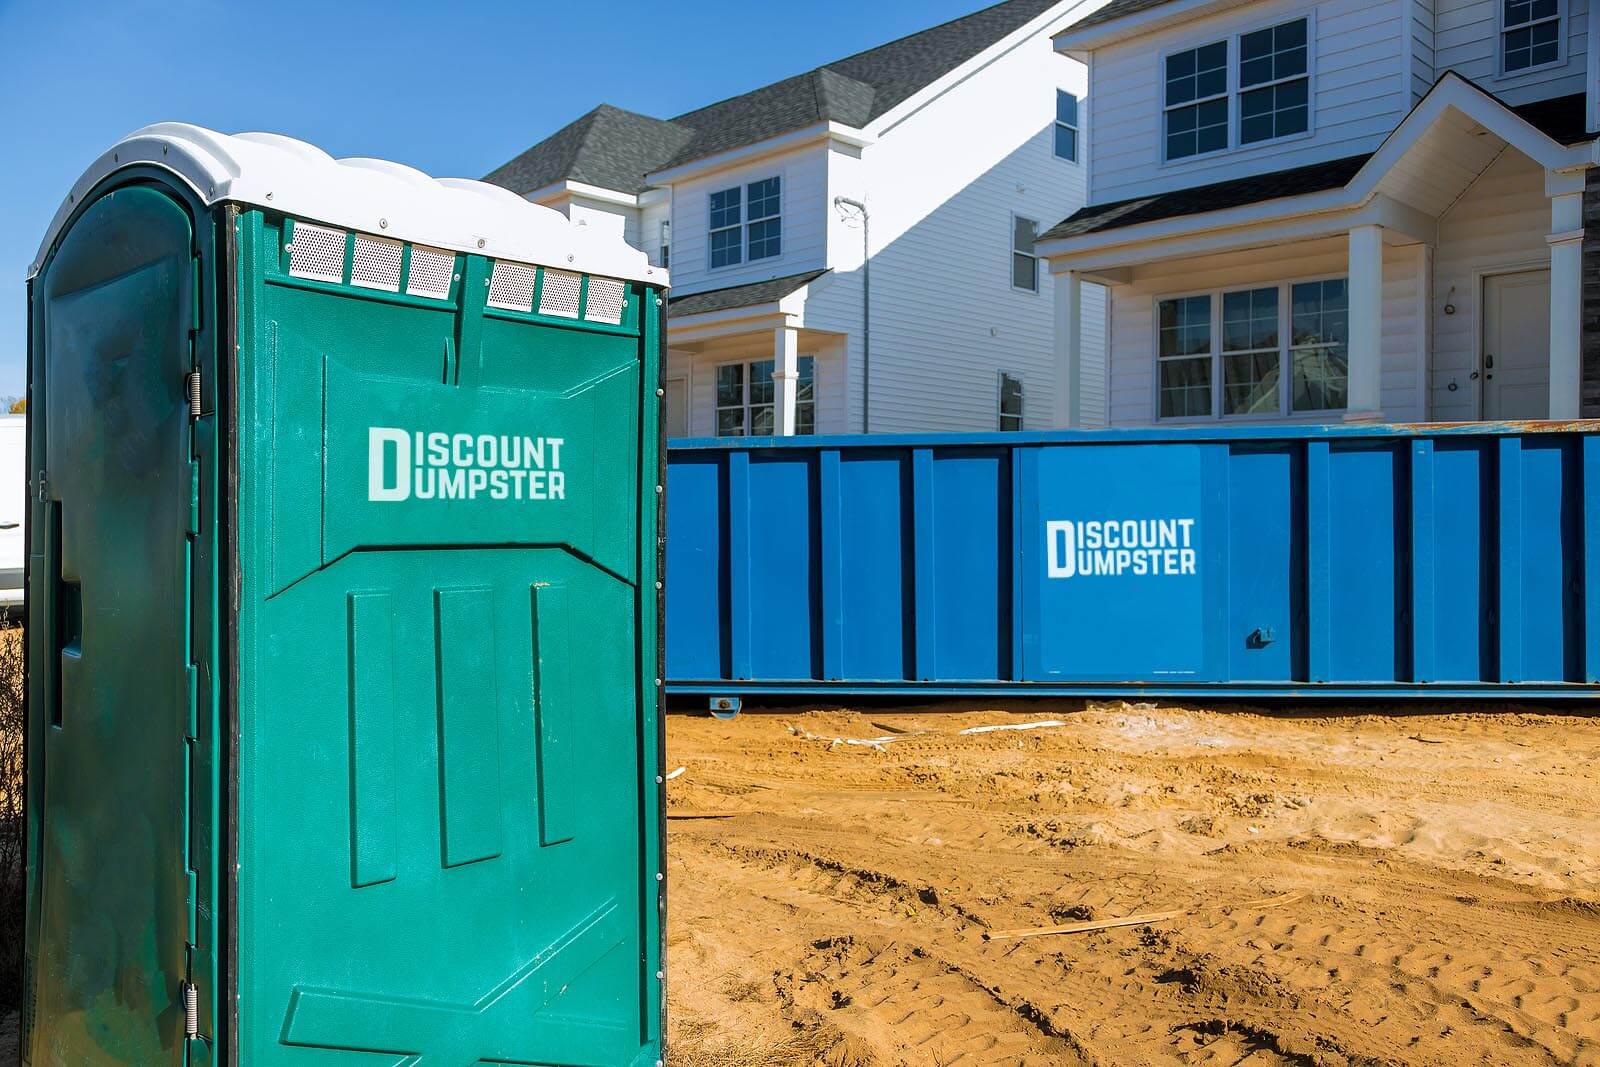 Discount dumpster has dumpsters of all sizes to manage the waste at your next home improvement project in chicago il